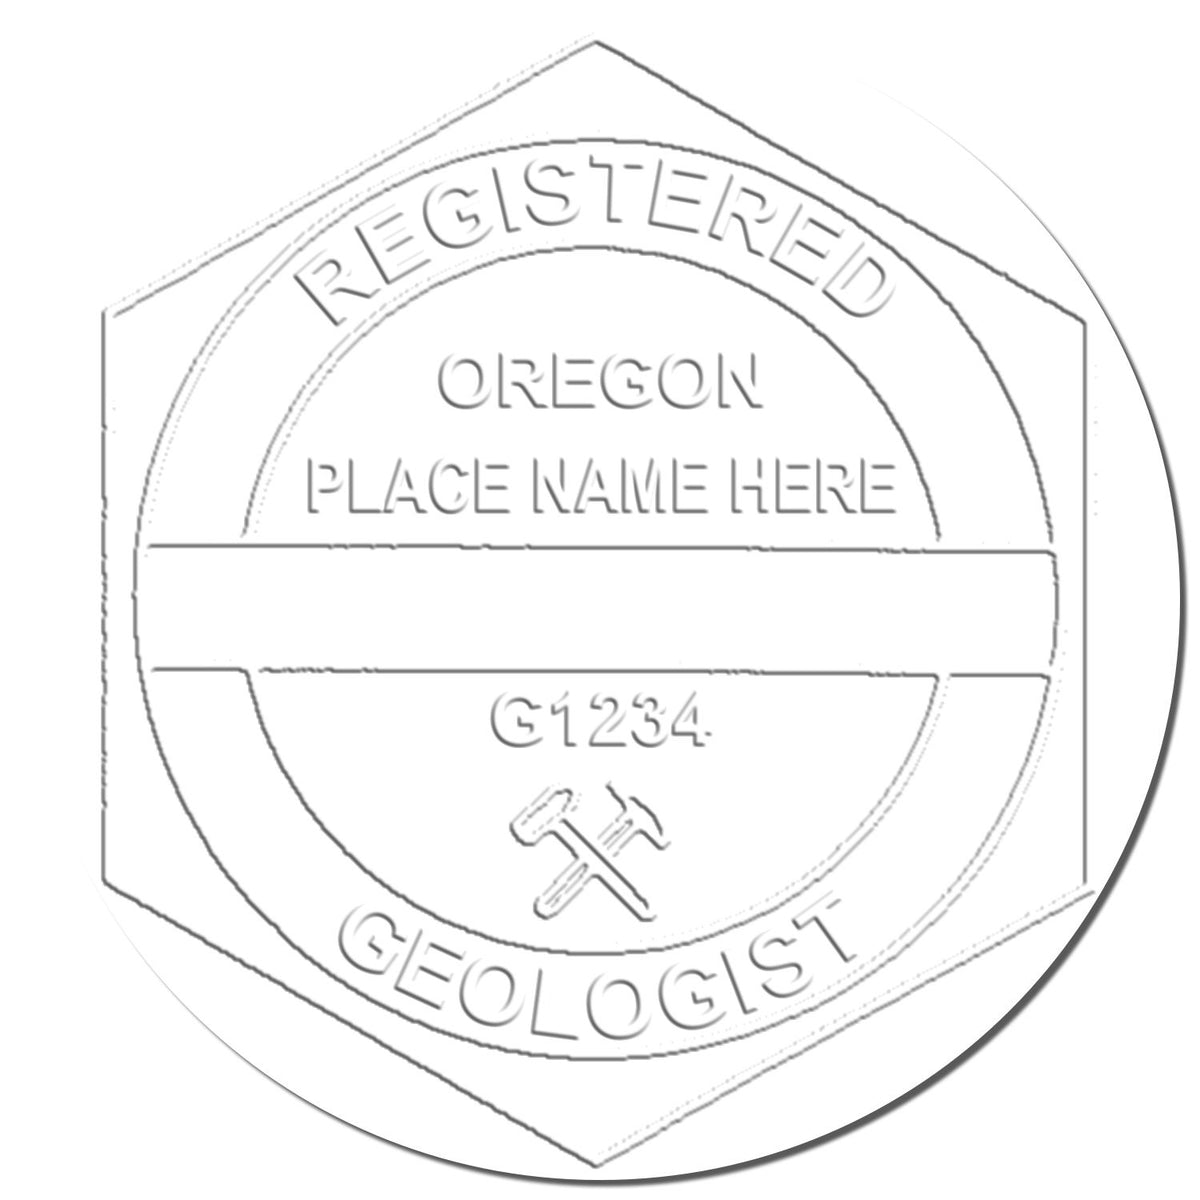 An in use photo of the Heavy Duty Cast Iron Oregon Geologist Seal Embosser showing a sample imprint on a cardstock